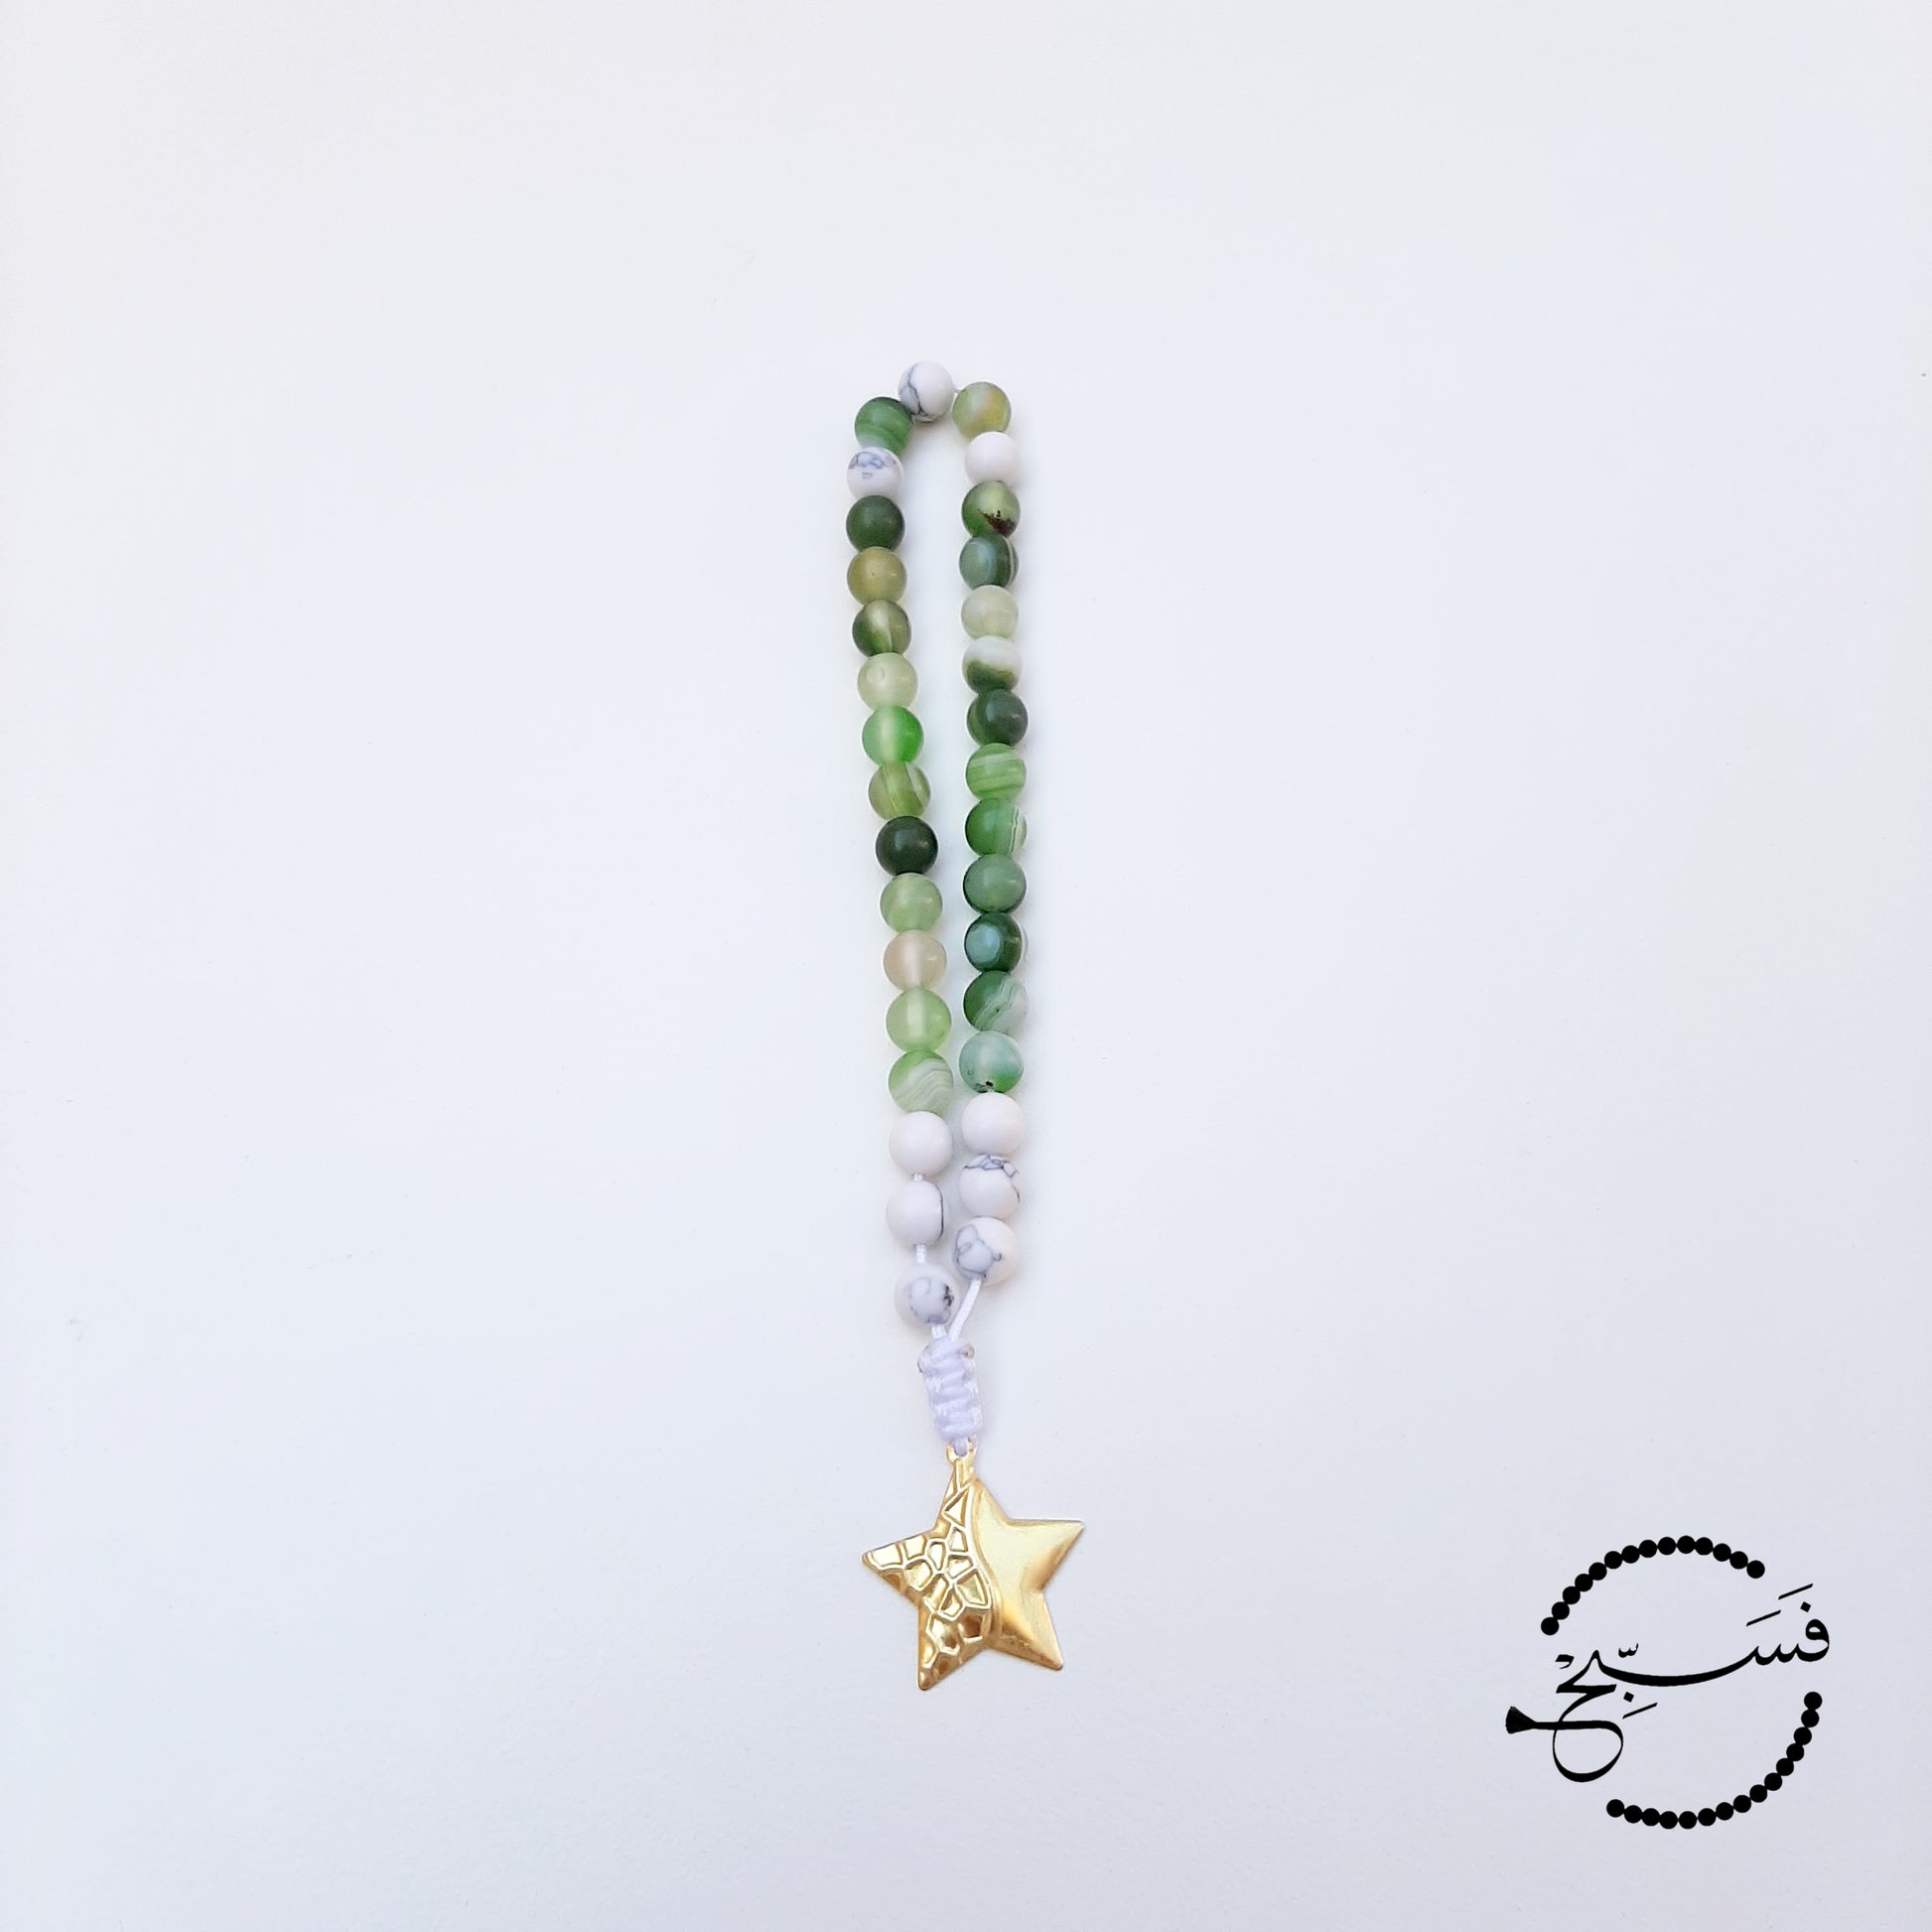 Green agate and white howlite beads, with a brass star pendant.  33 beads